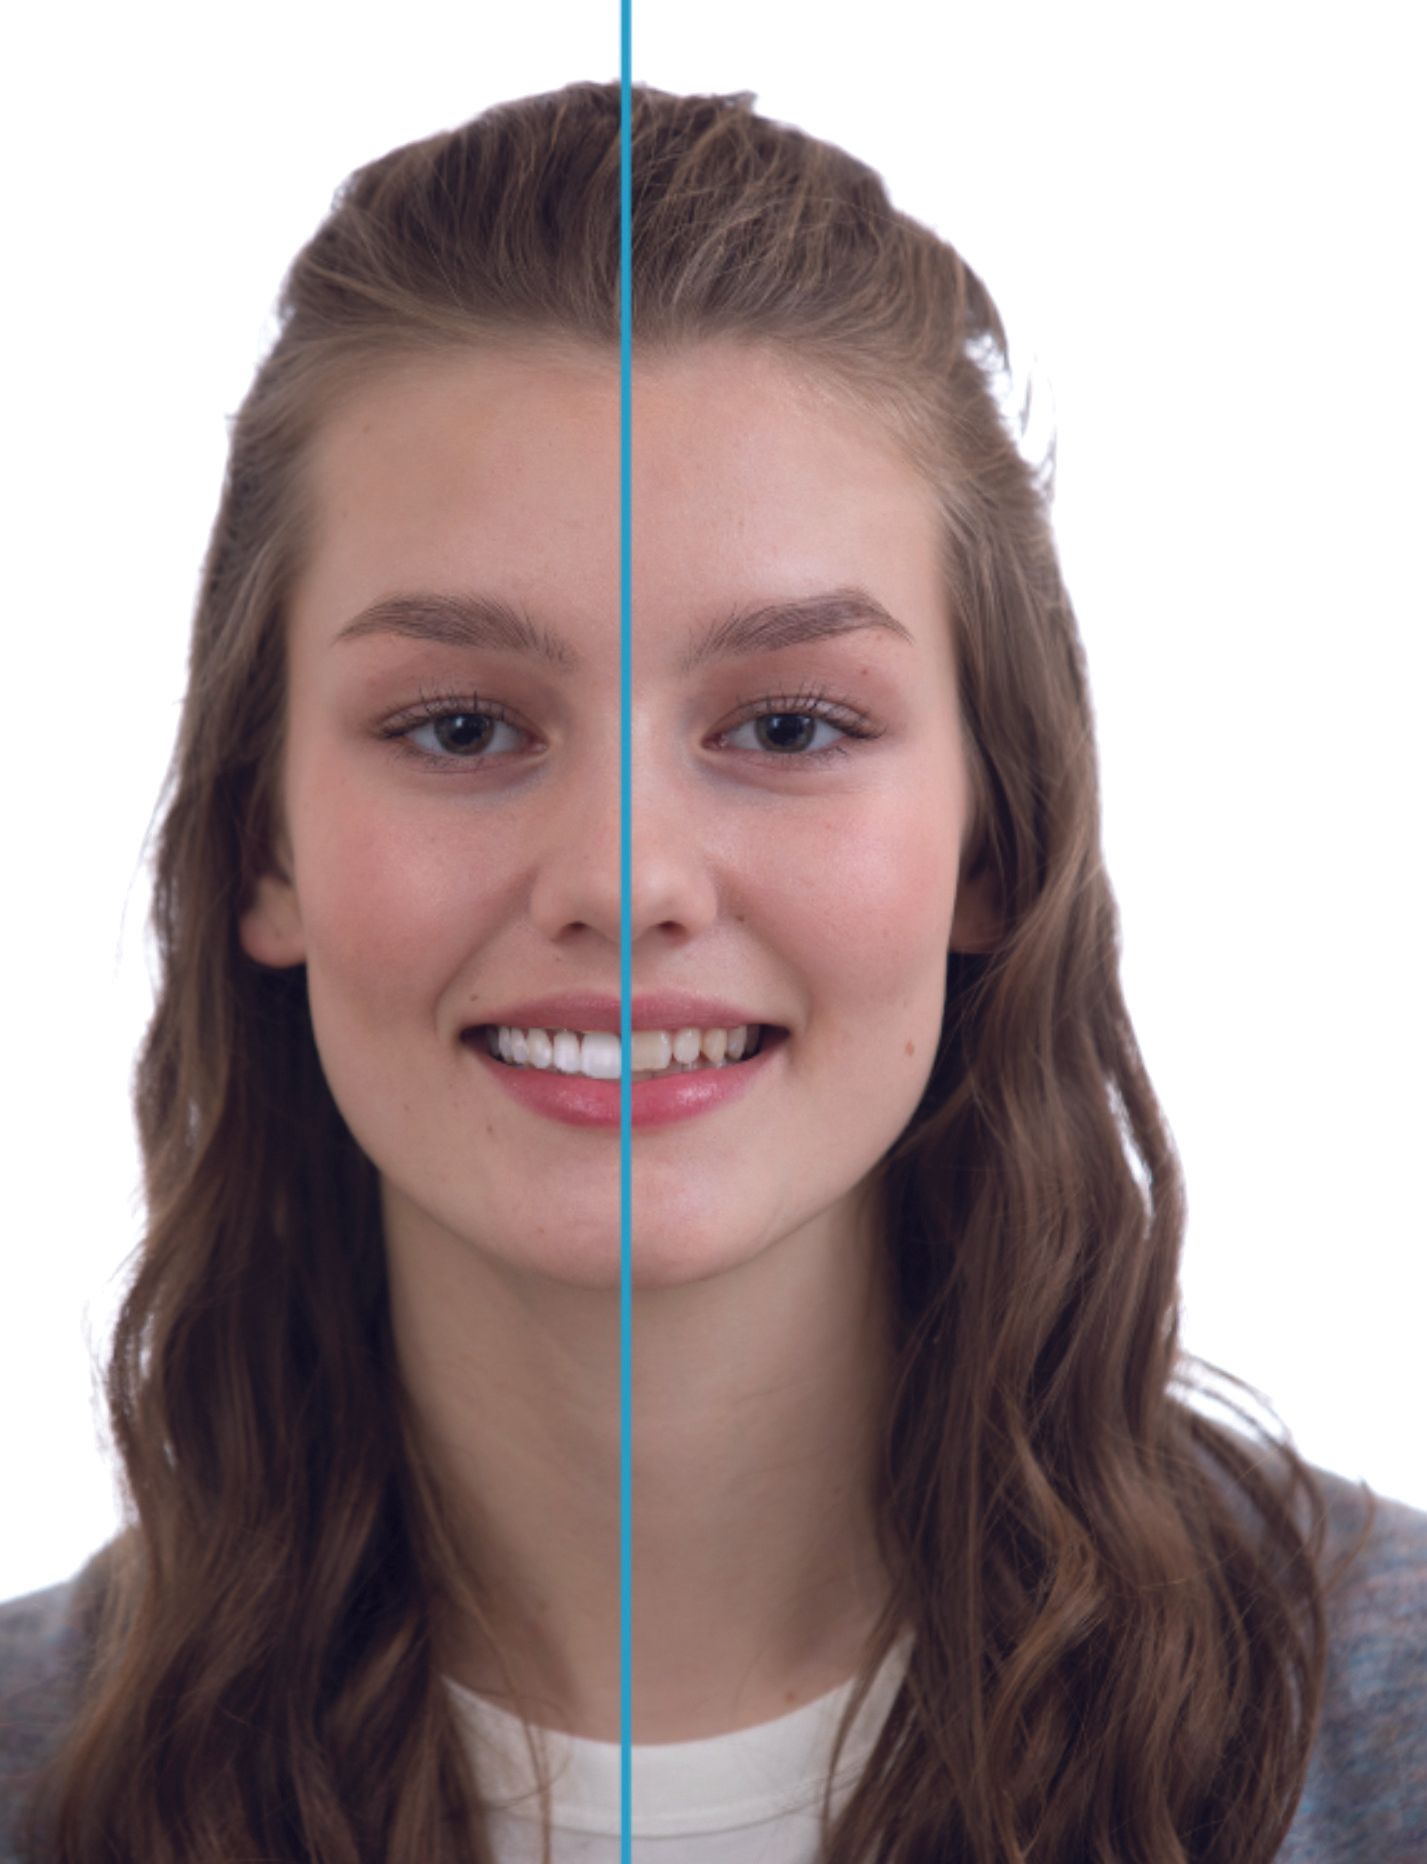 Half of a woman 's face is shown with a blue line between them